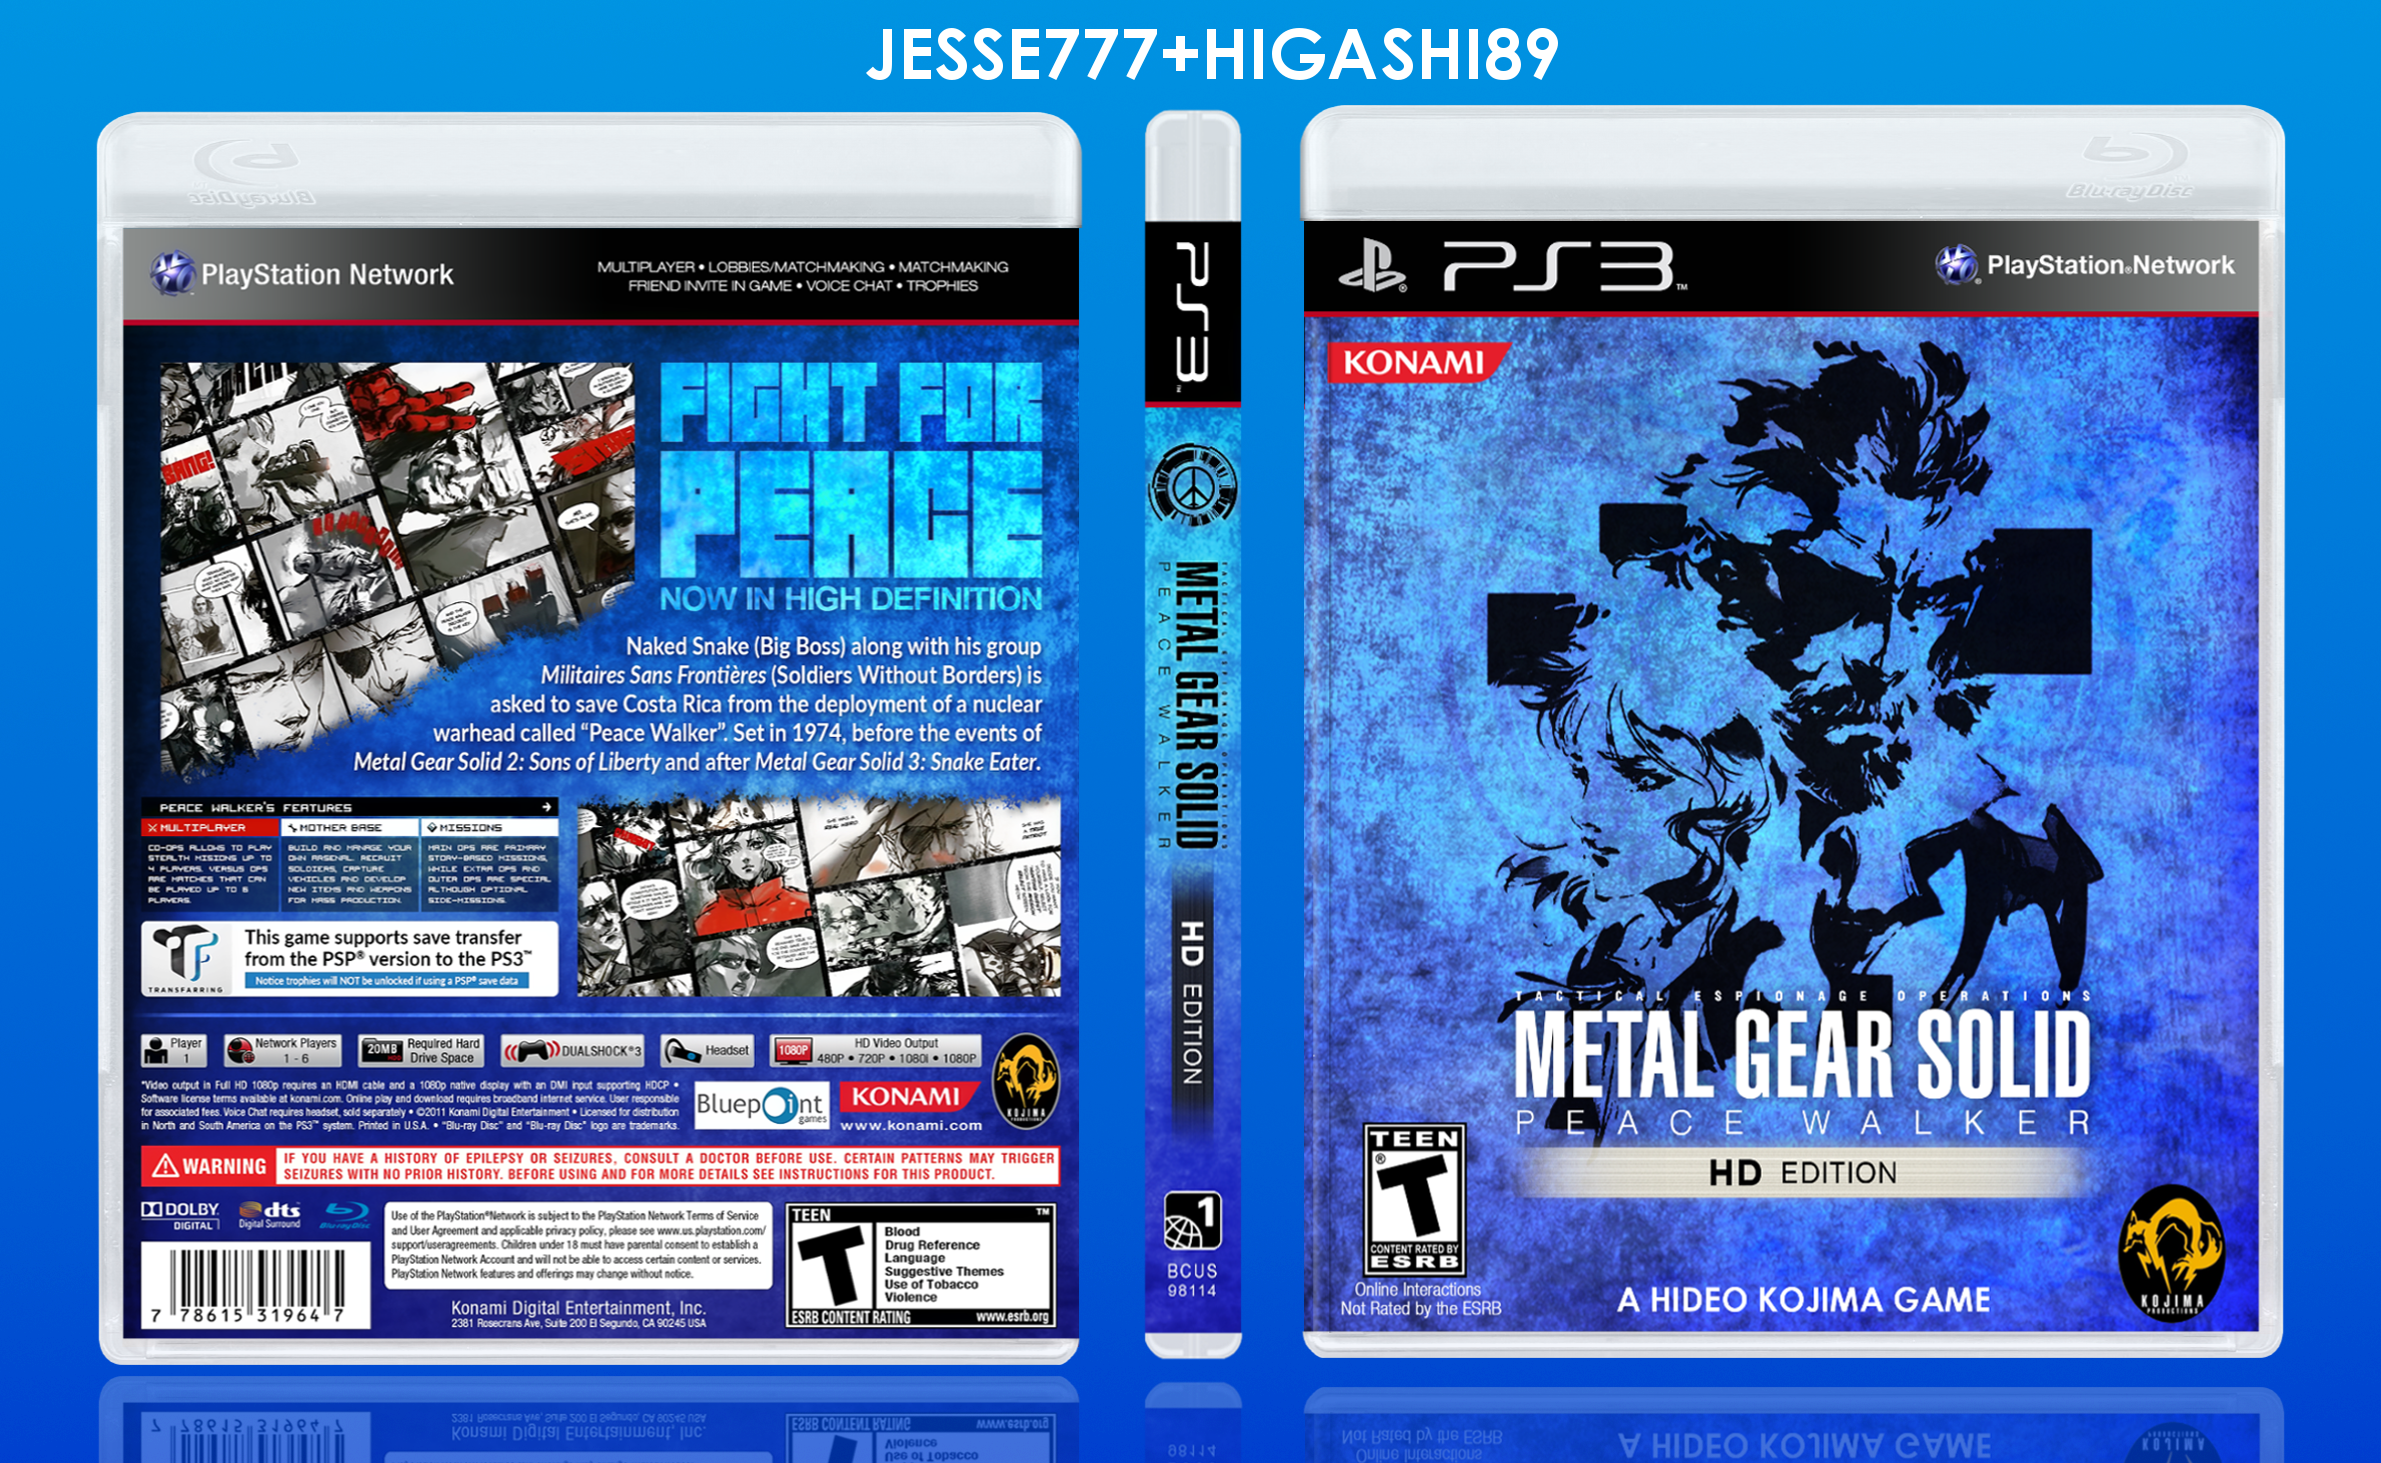 Metal Gear Solid Peace Walker HD Edition box cover